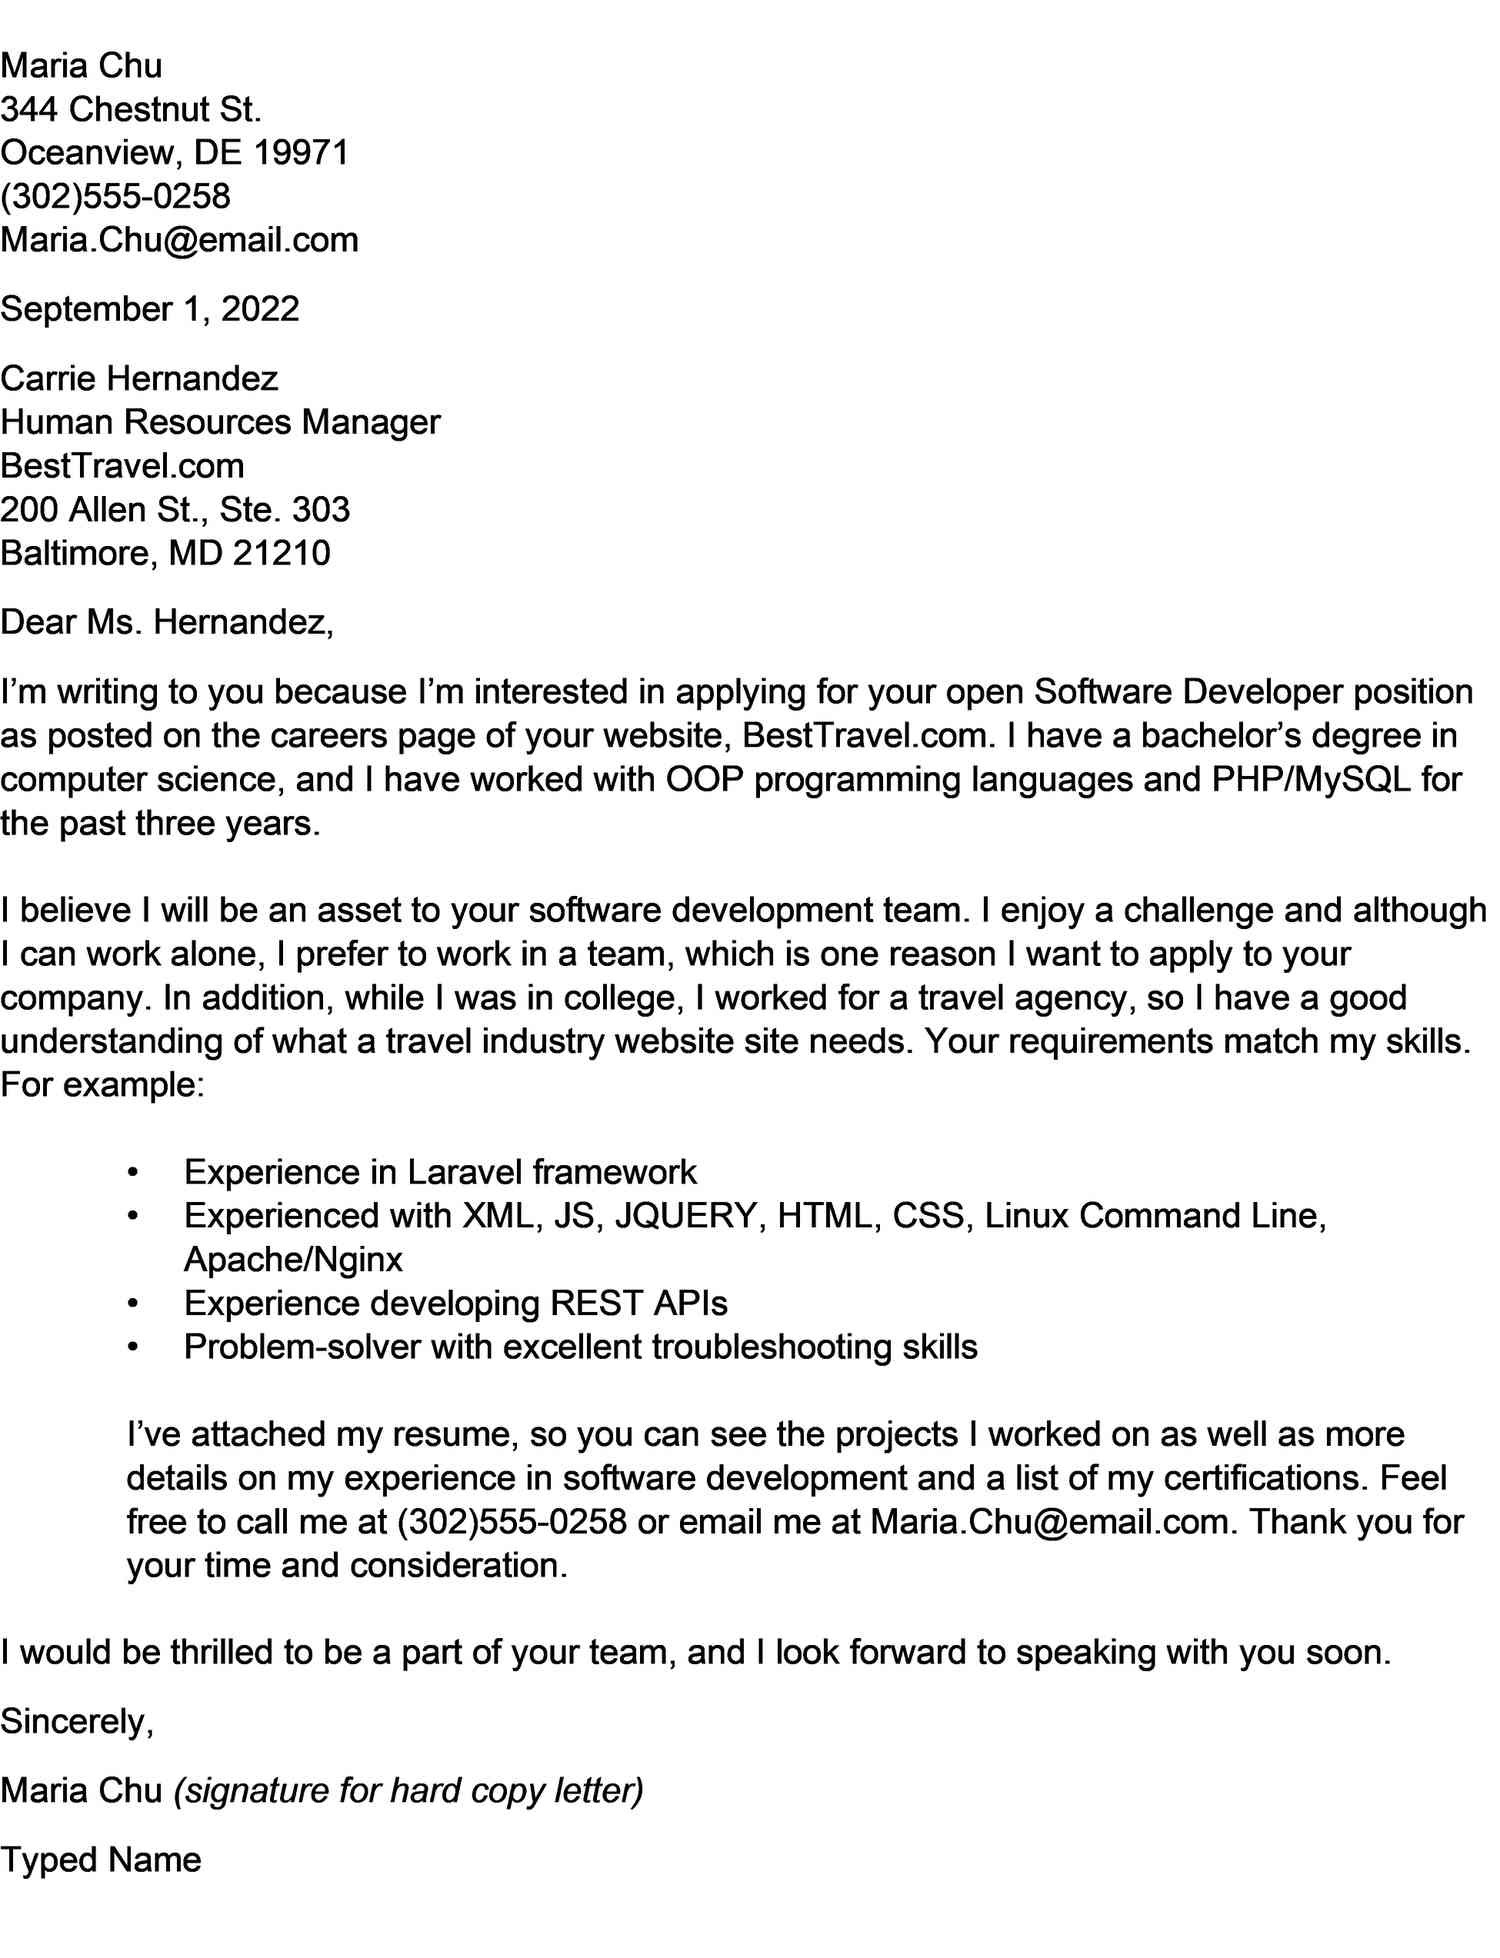 Sample Application Letter with Resume attached Cover Letter Examples Listed by Type Of Job